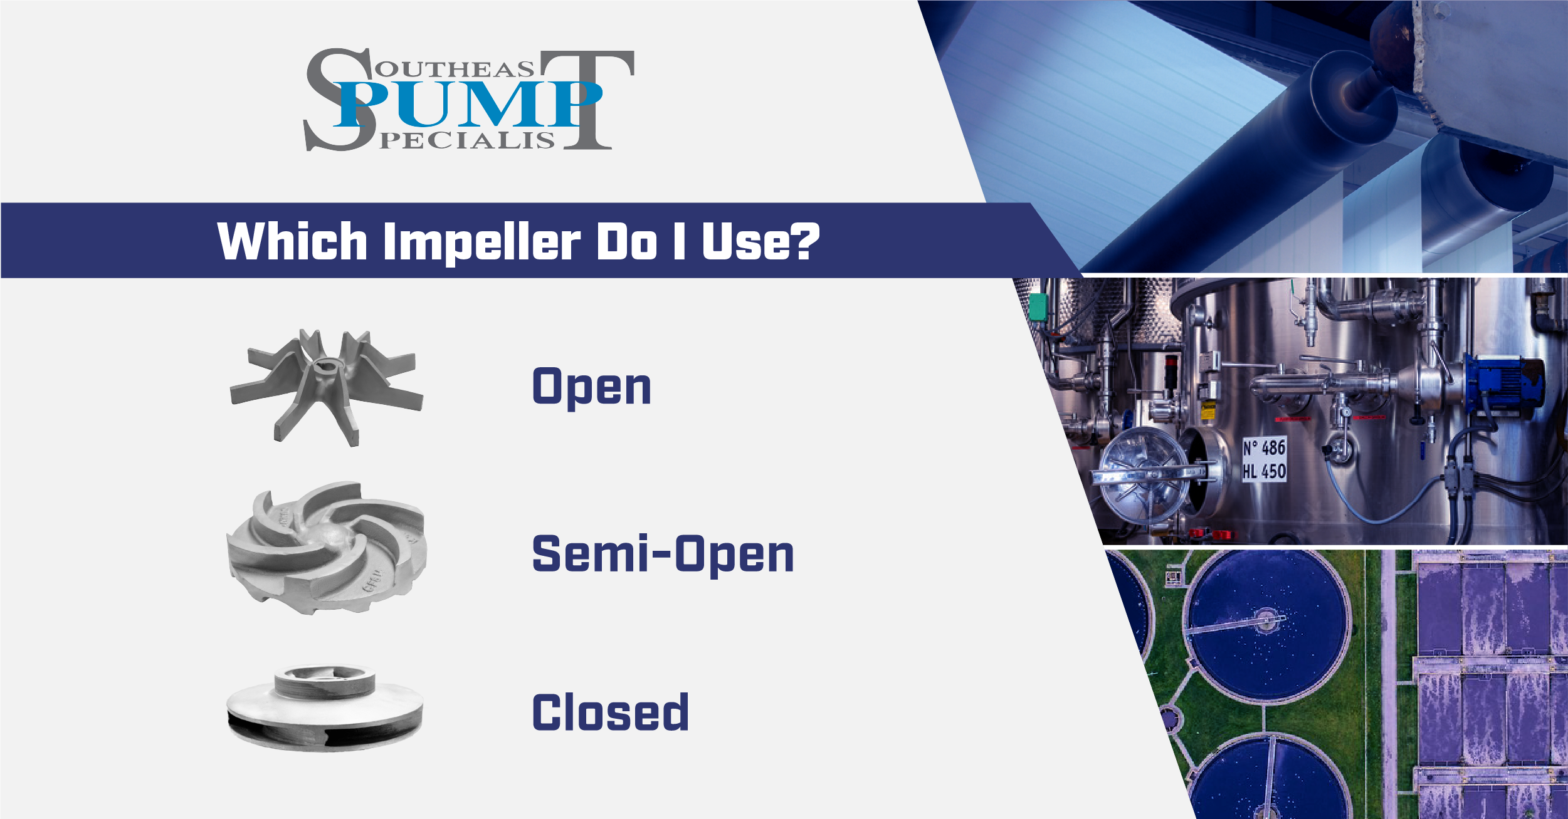 This image show the title of the post and the 3 different types of centrifugal pump impellers.